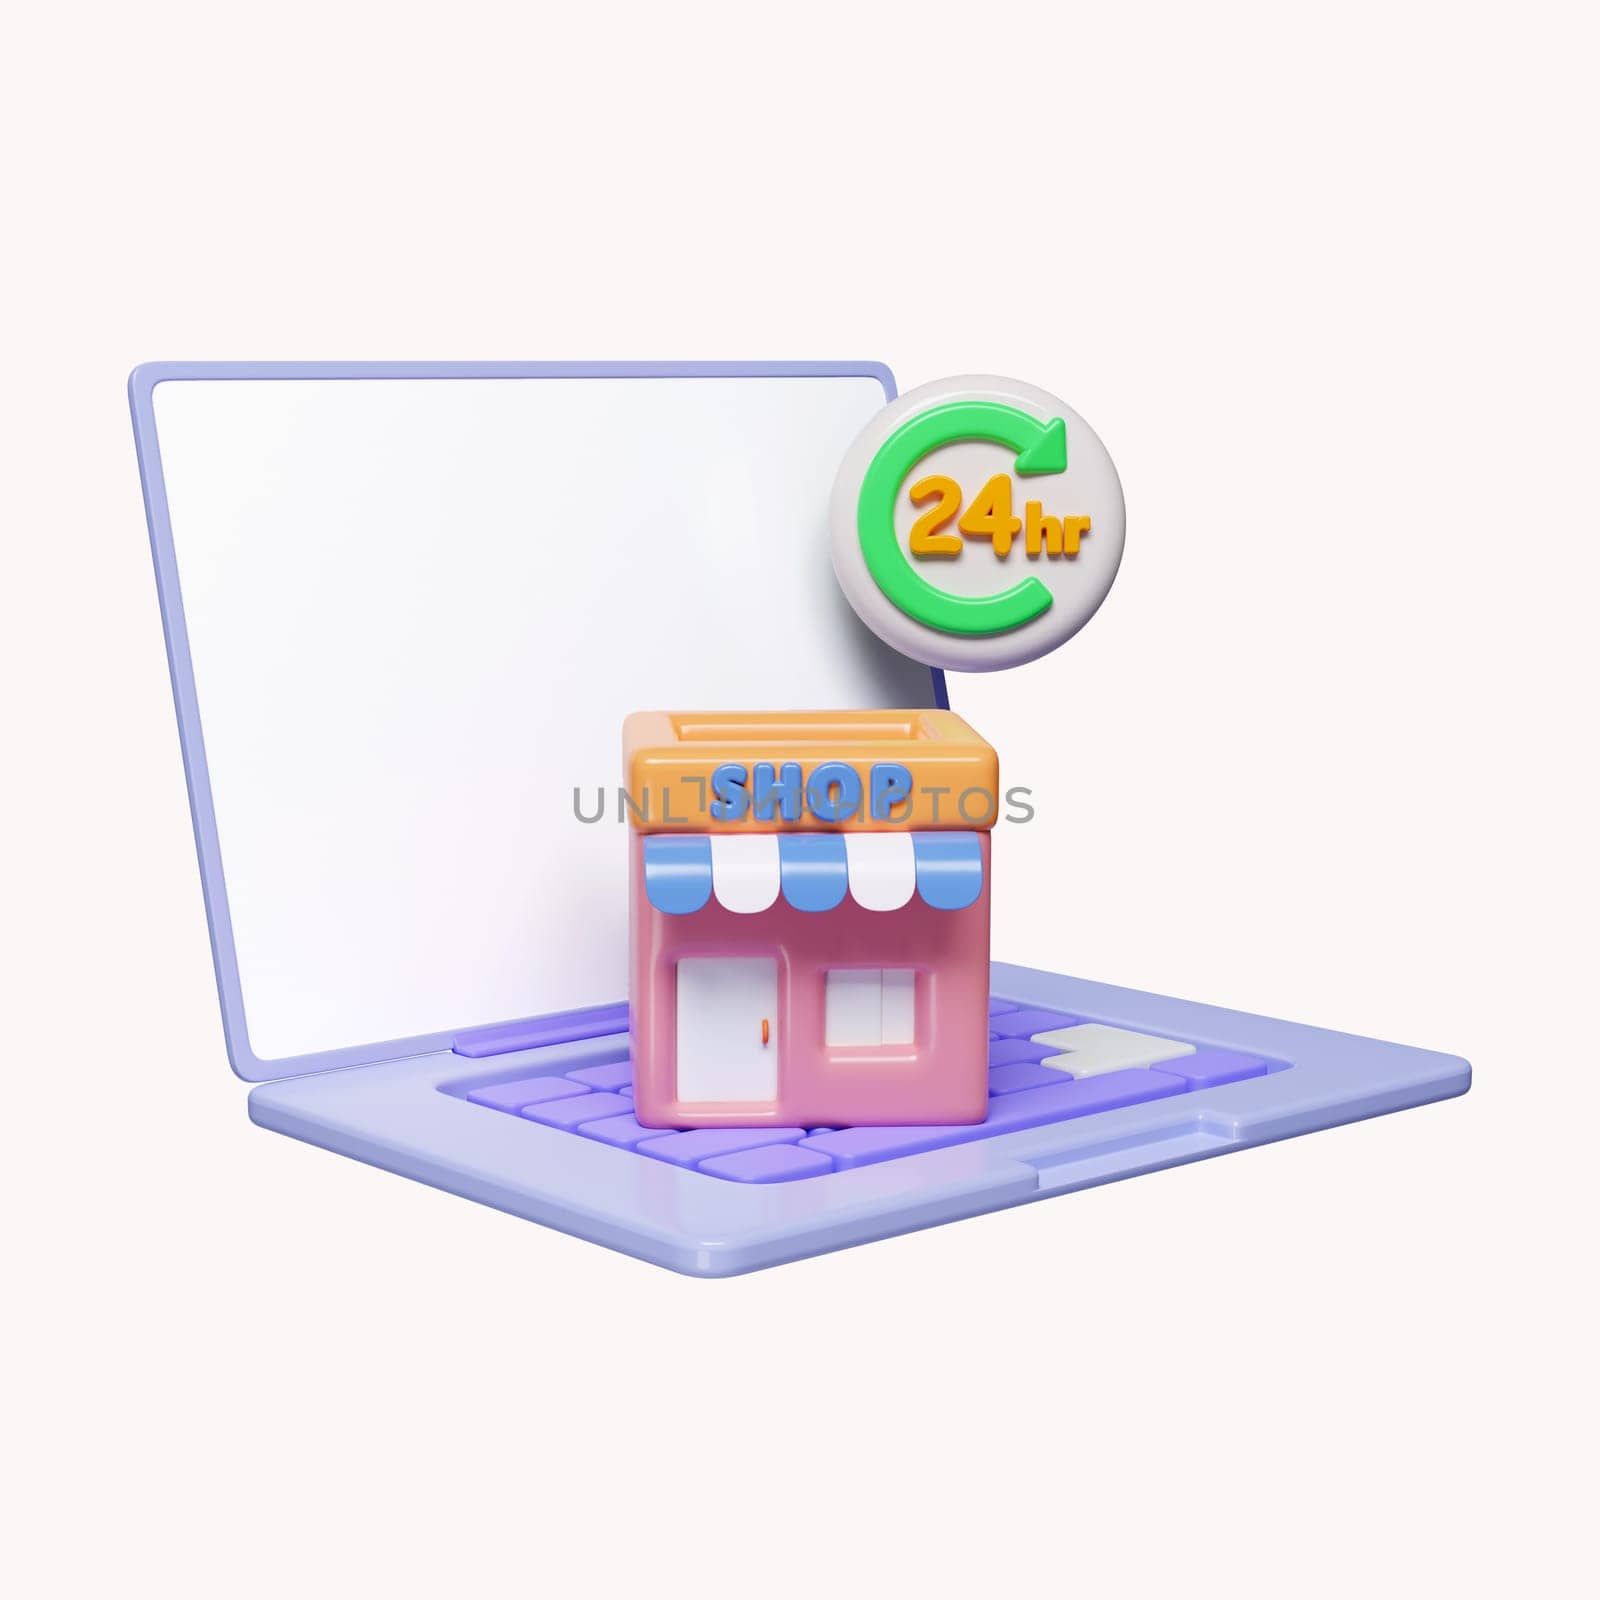 3d online shopping E-commerce, store, box, 24 hours on laptop. Marketplace online. icon isolated on white background. 3d rendering illustration. Clipping path. by meepiangraphic